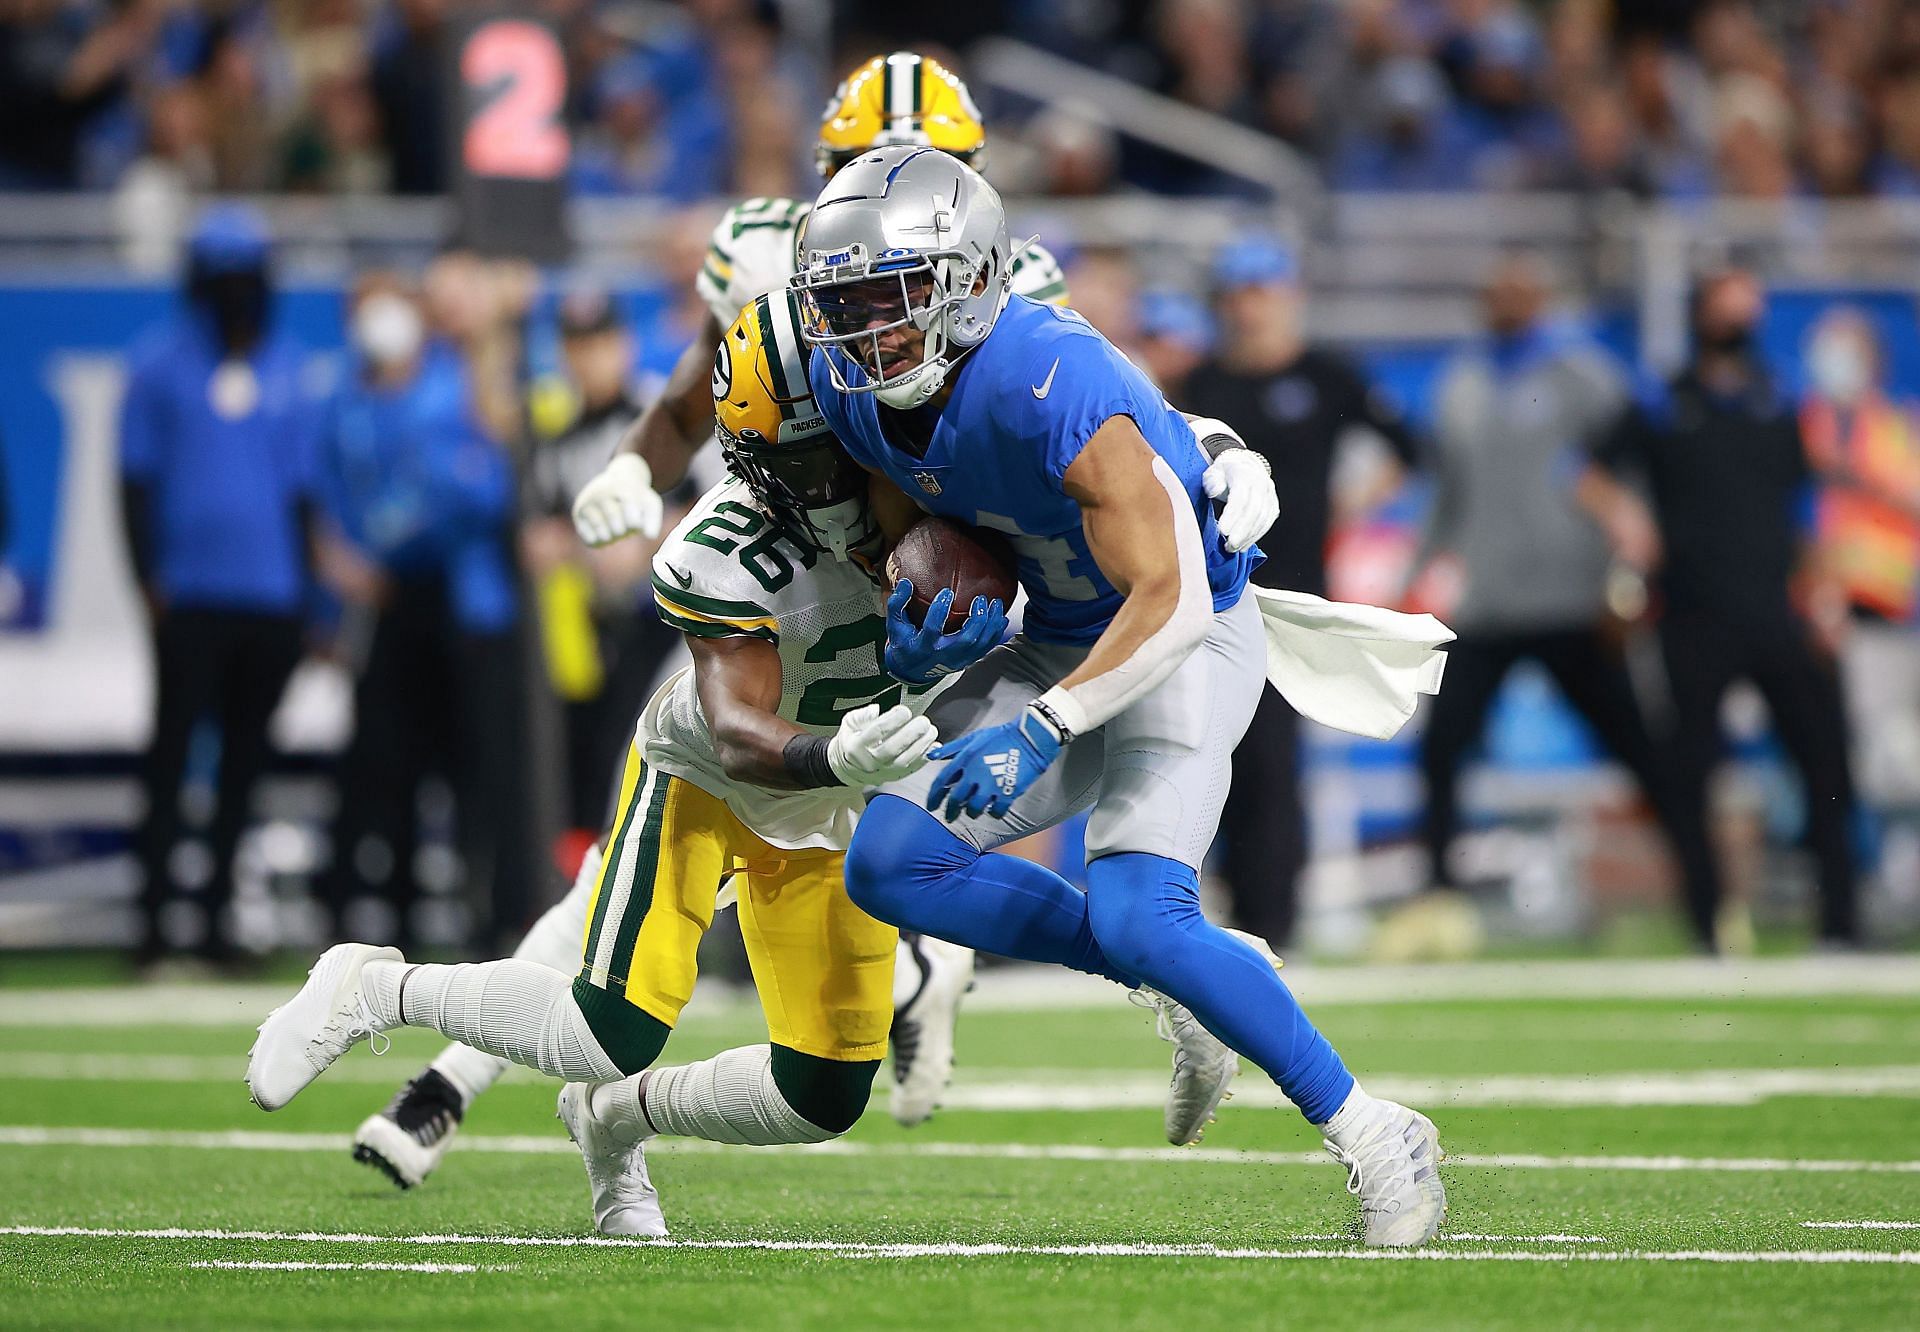 The Detroit Lions benefit from AFC East and NFC East matchups on the 2022 schedule